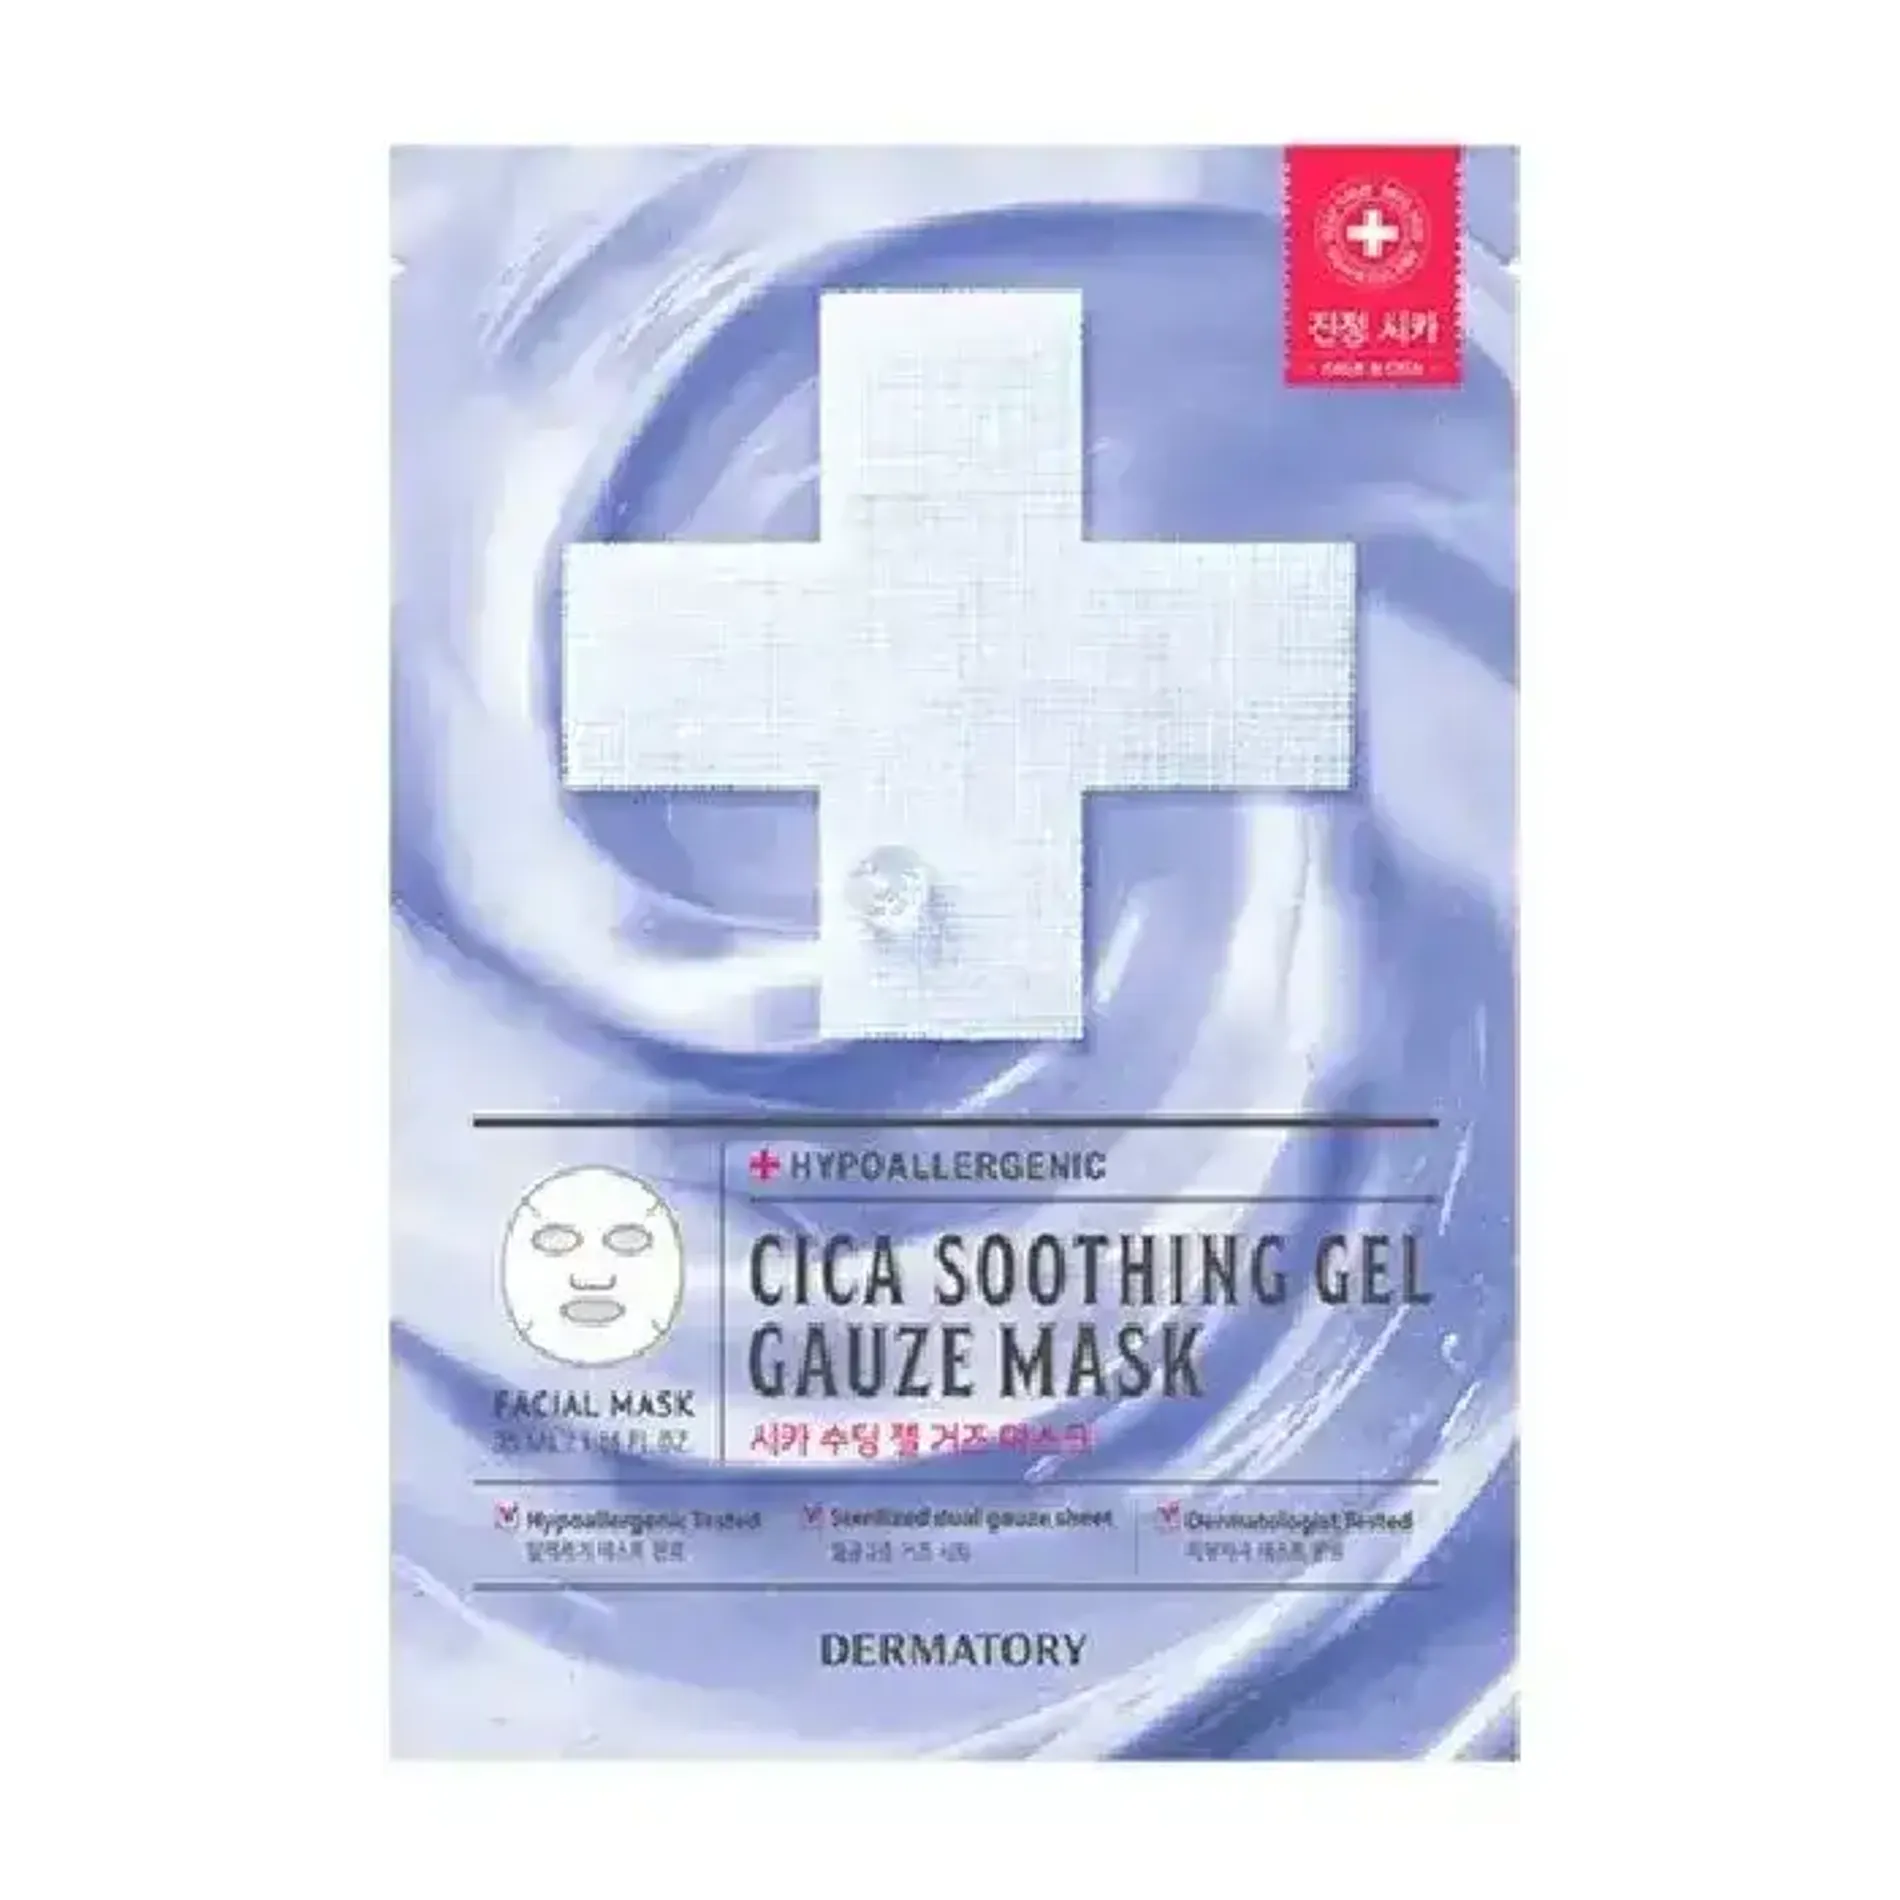 mat-na-giay-dermatory-hypoallergenic-cica-soothing-gel-gauze-mask-35ml-1